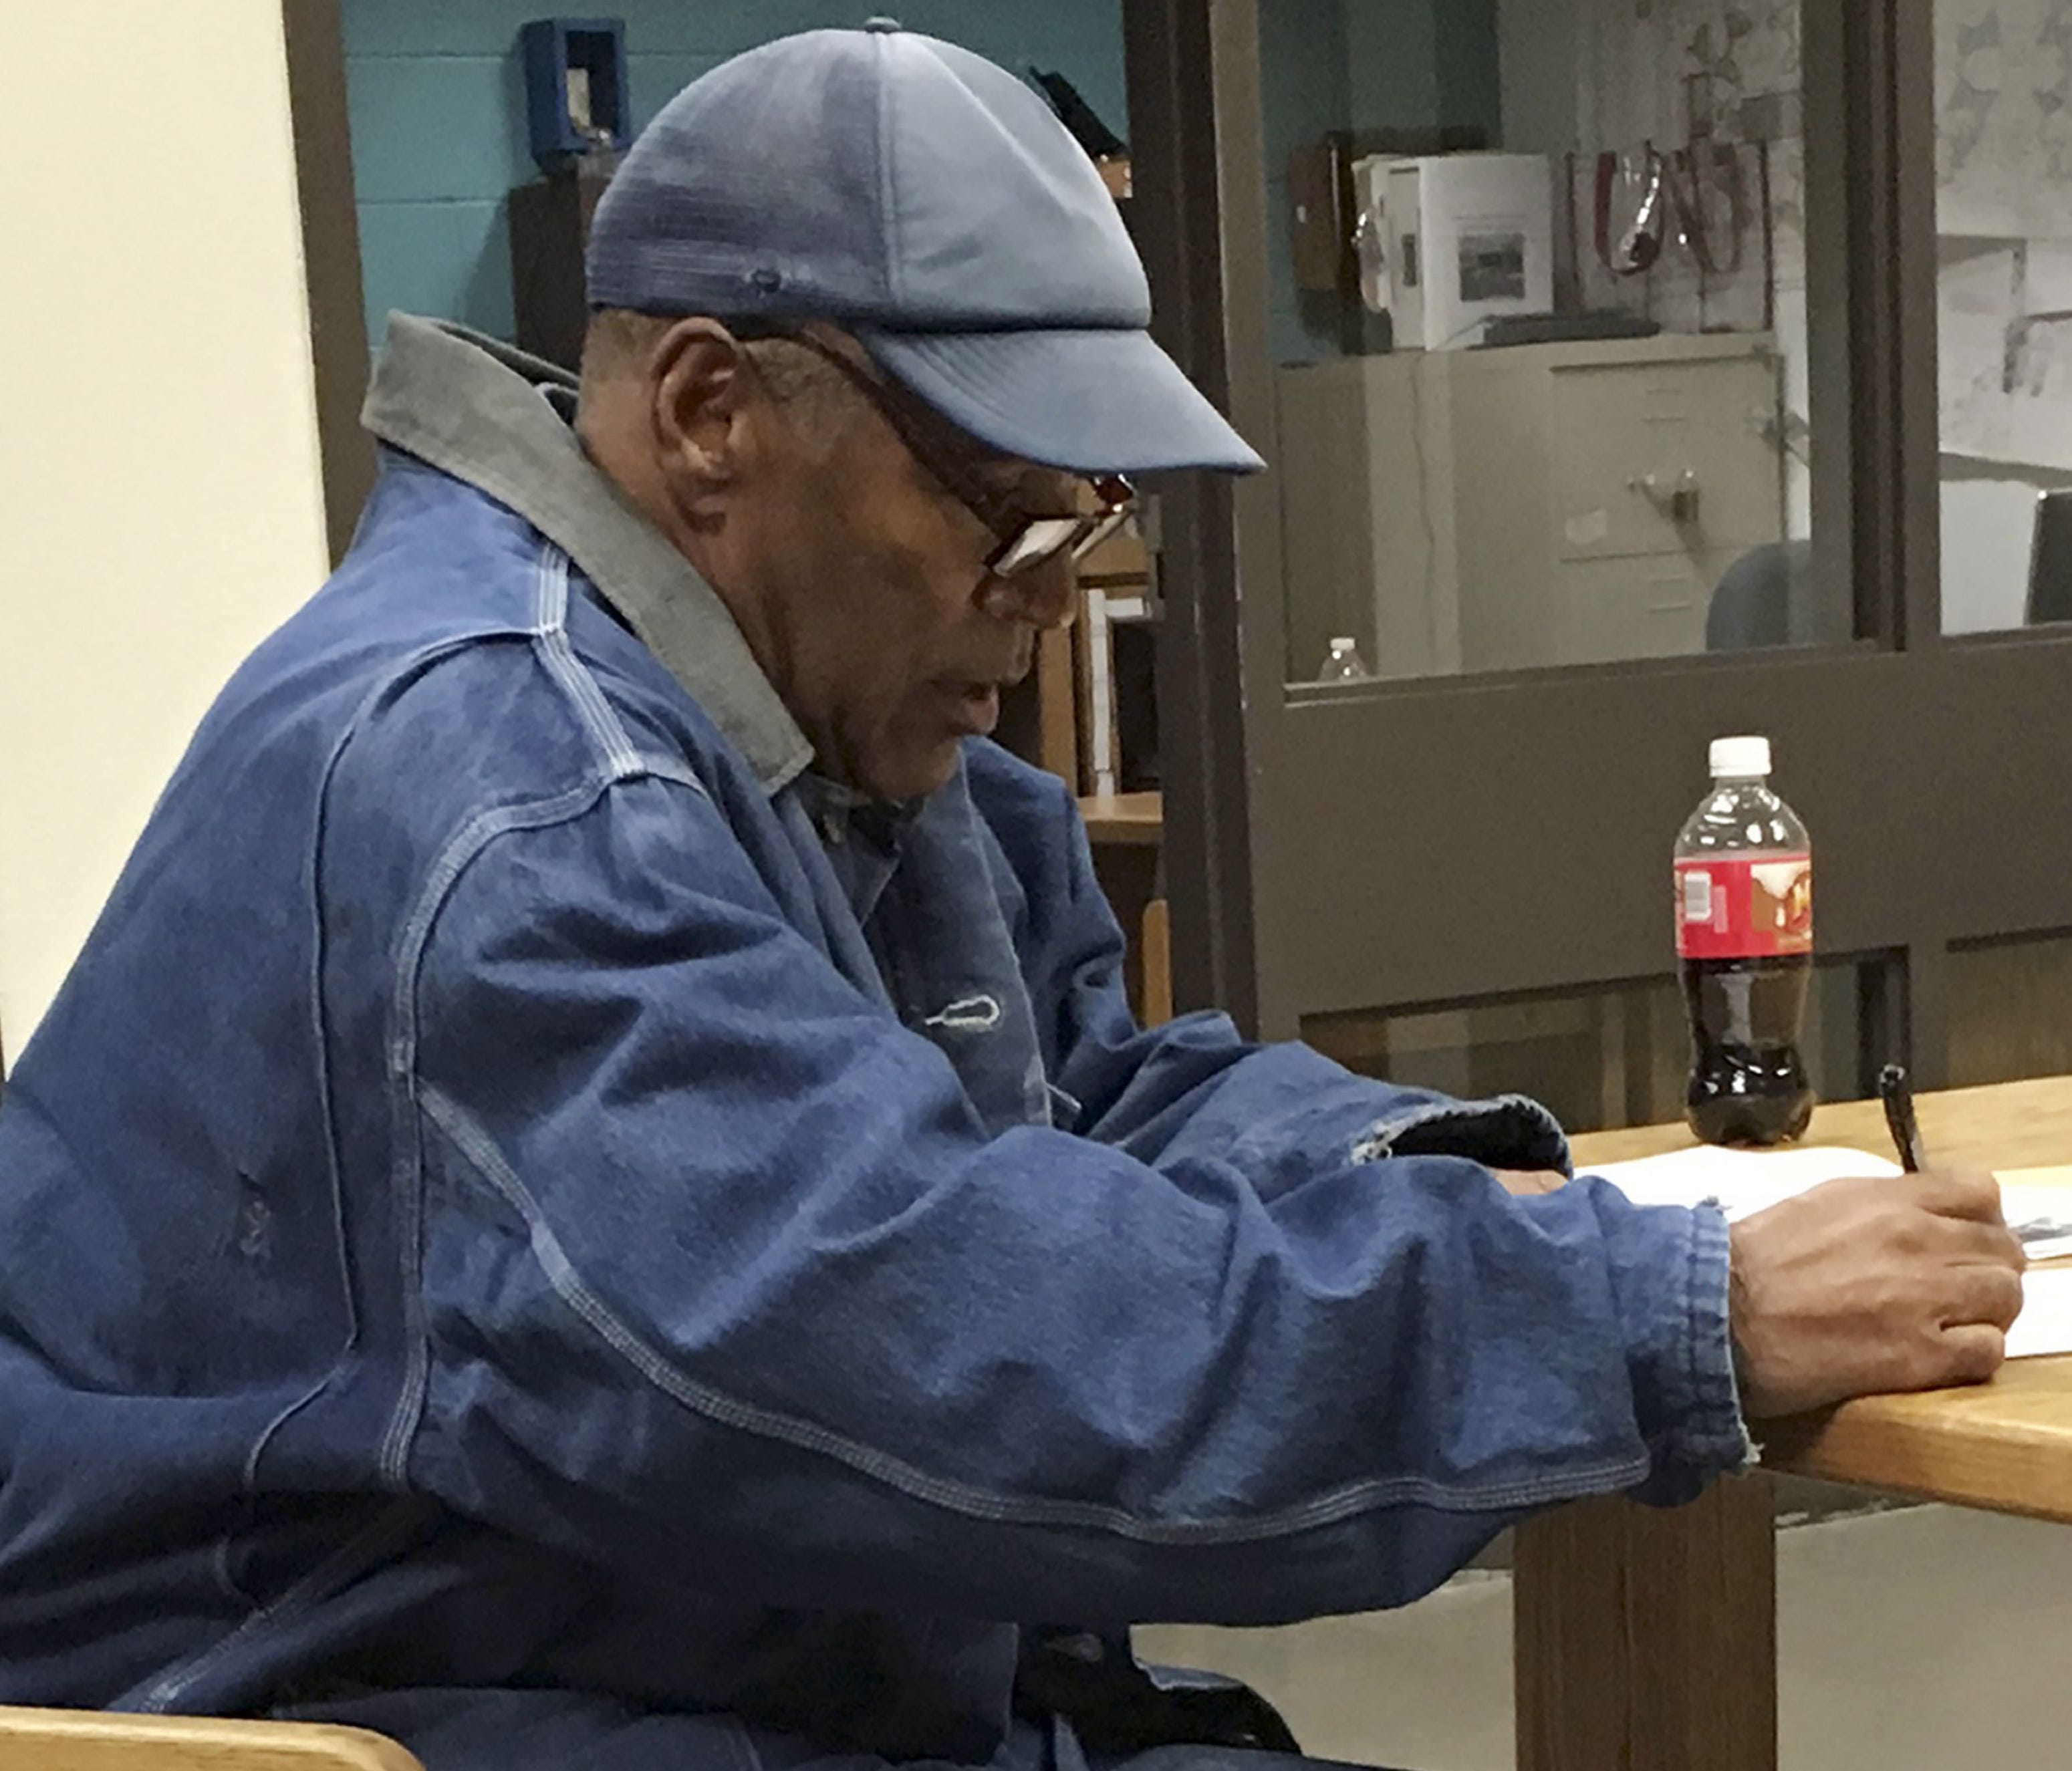 This image released by the Nevada Department of Corrections shows O.J. Simpson signing documents and leaving Lovelock Correctional Centre in Lovelock, Nevada, early on October 1, 2017.